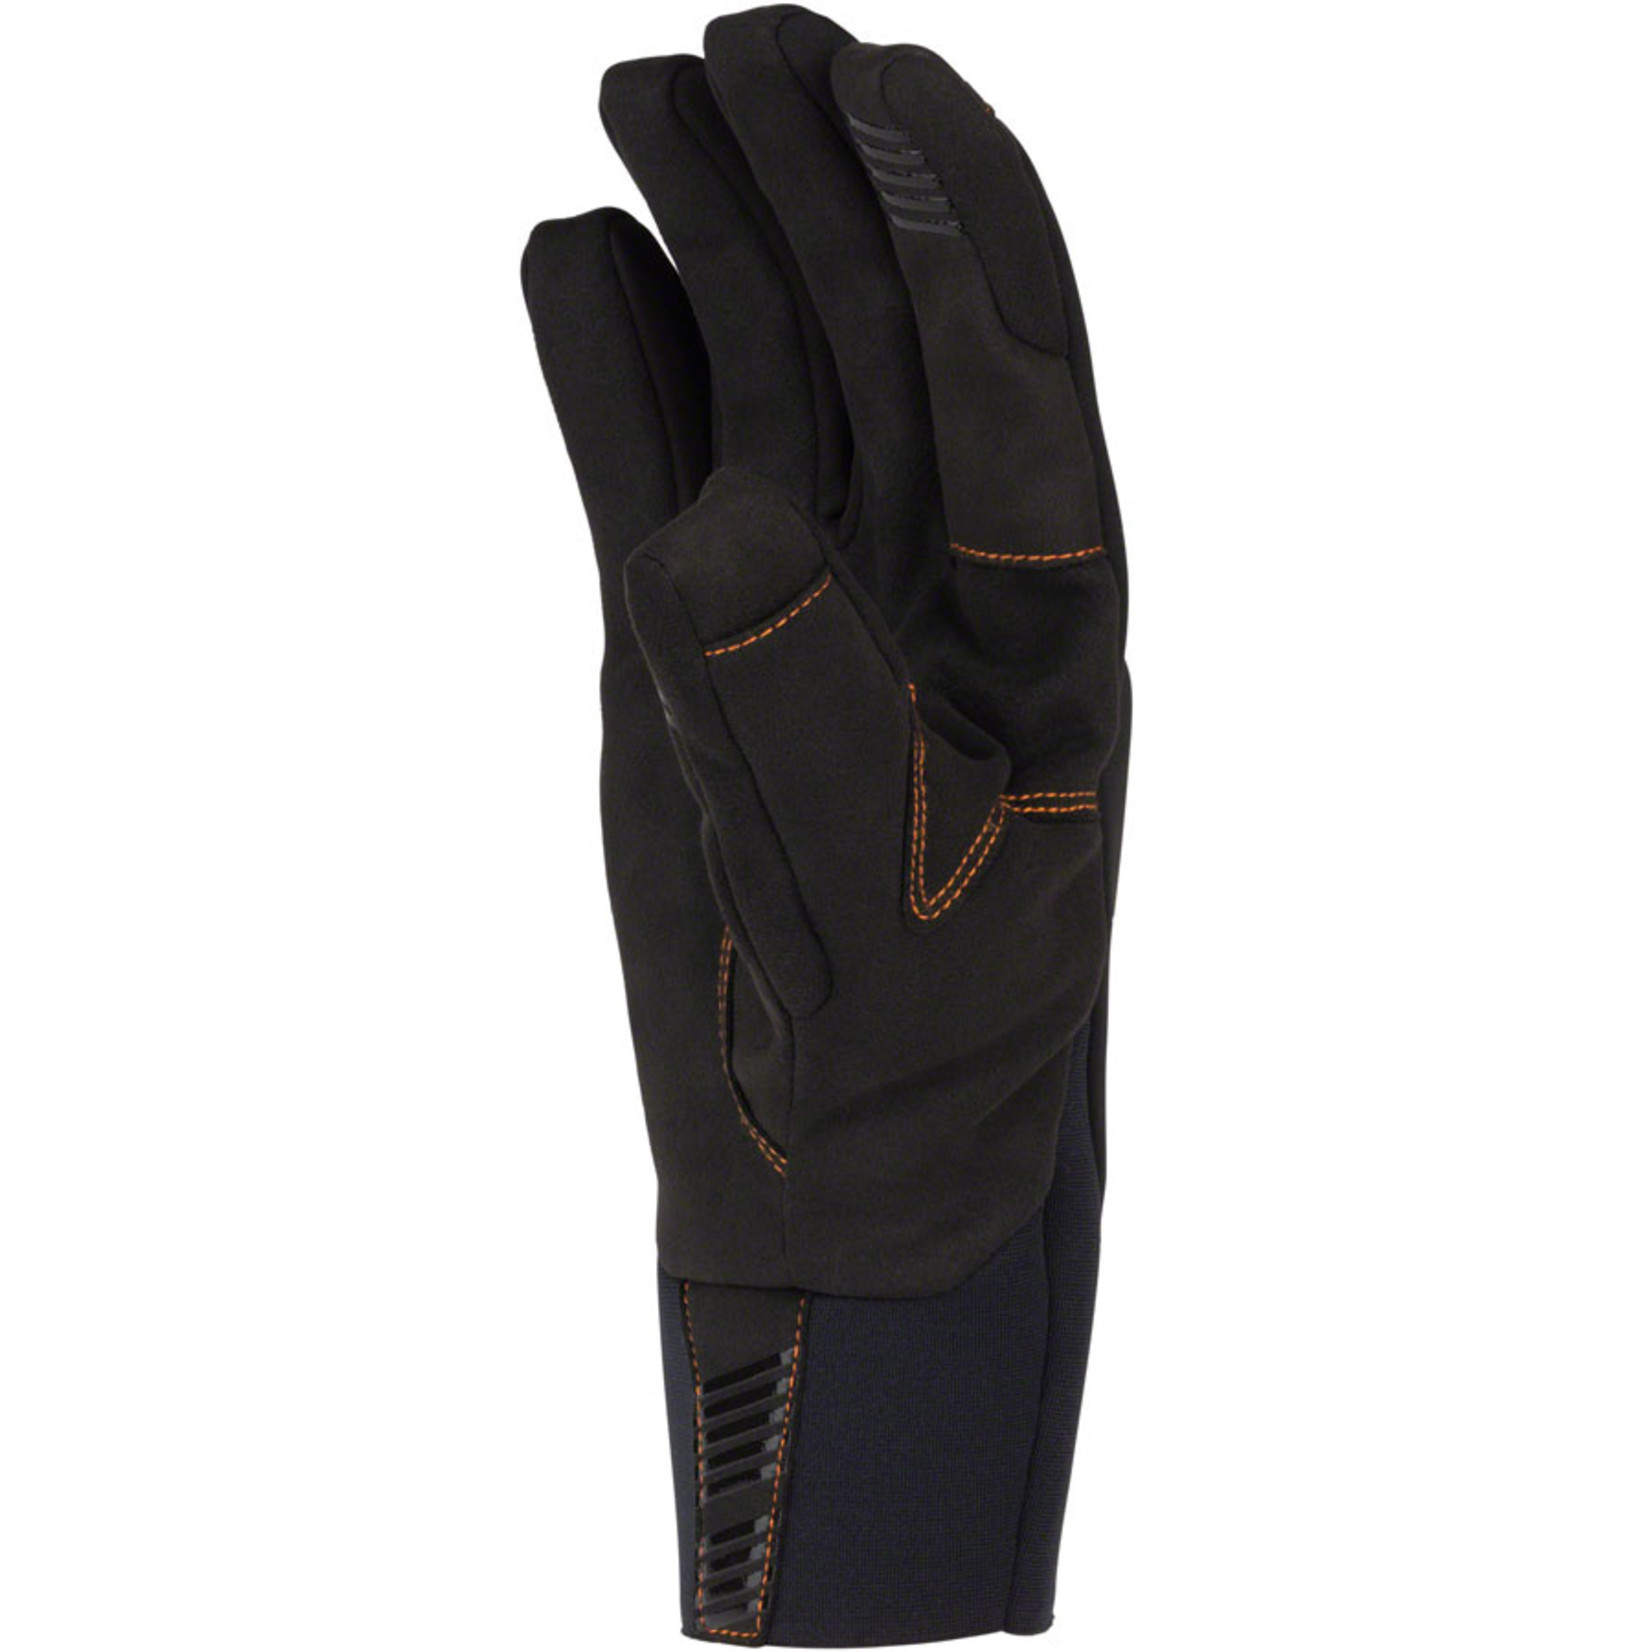 45 North 45NRTH Nokken Cool Weather Cycling Glove